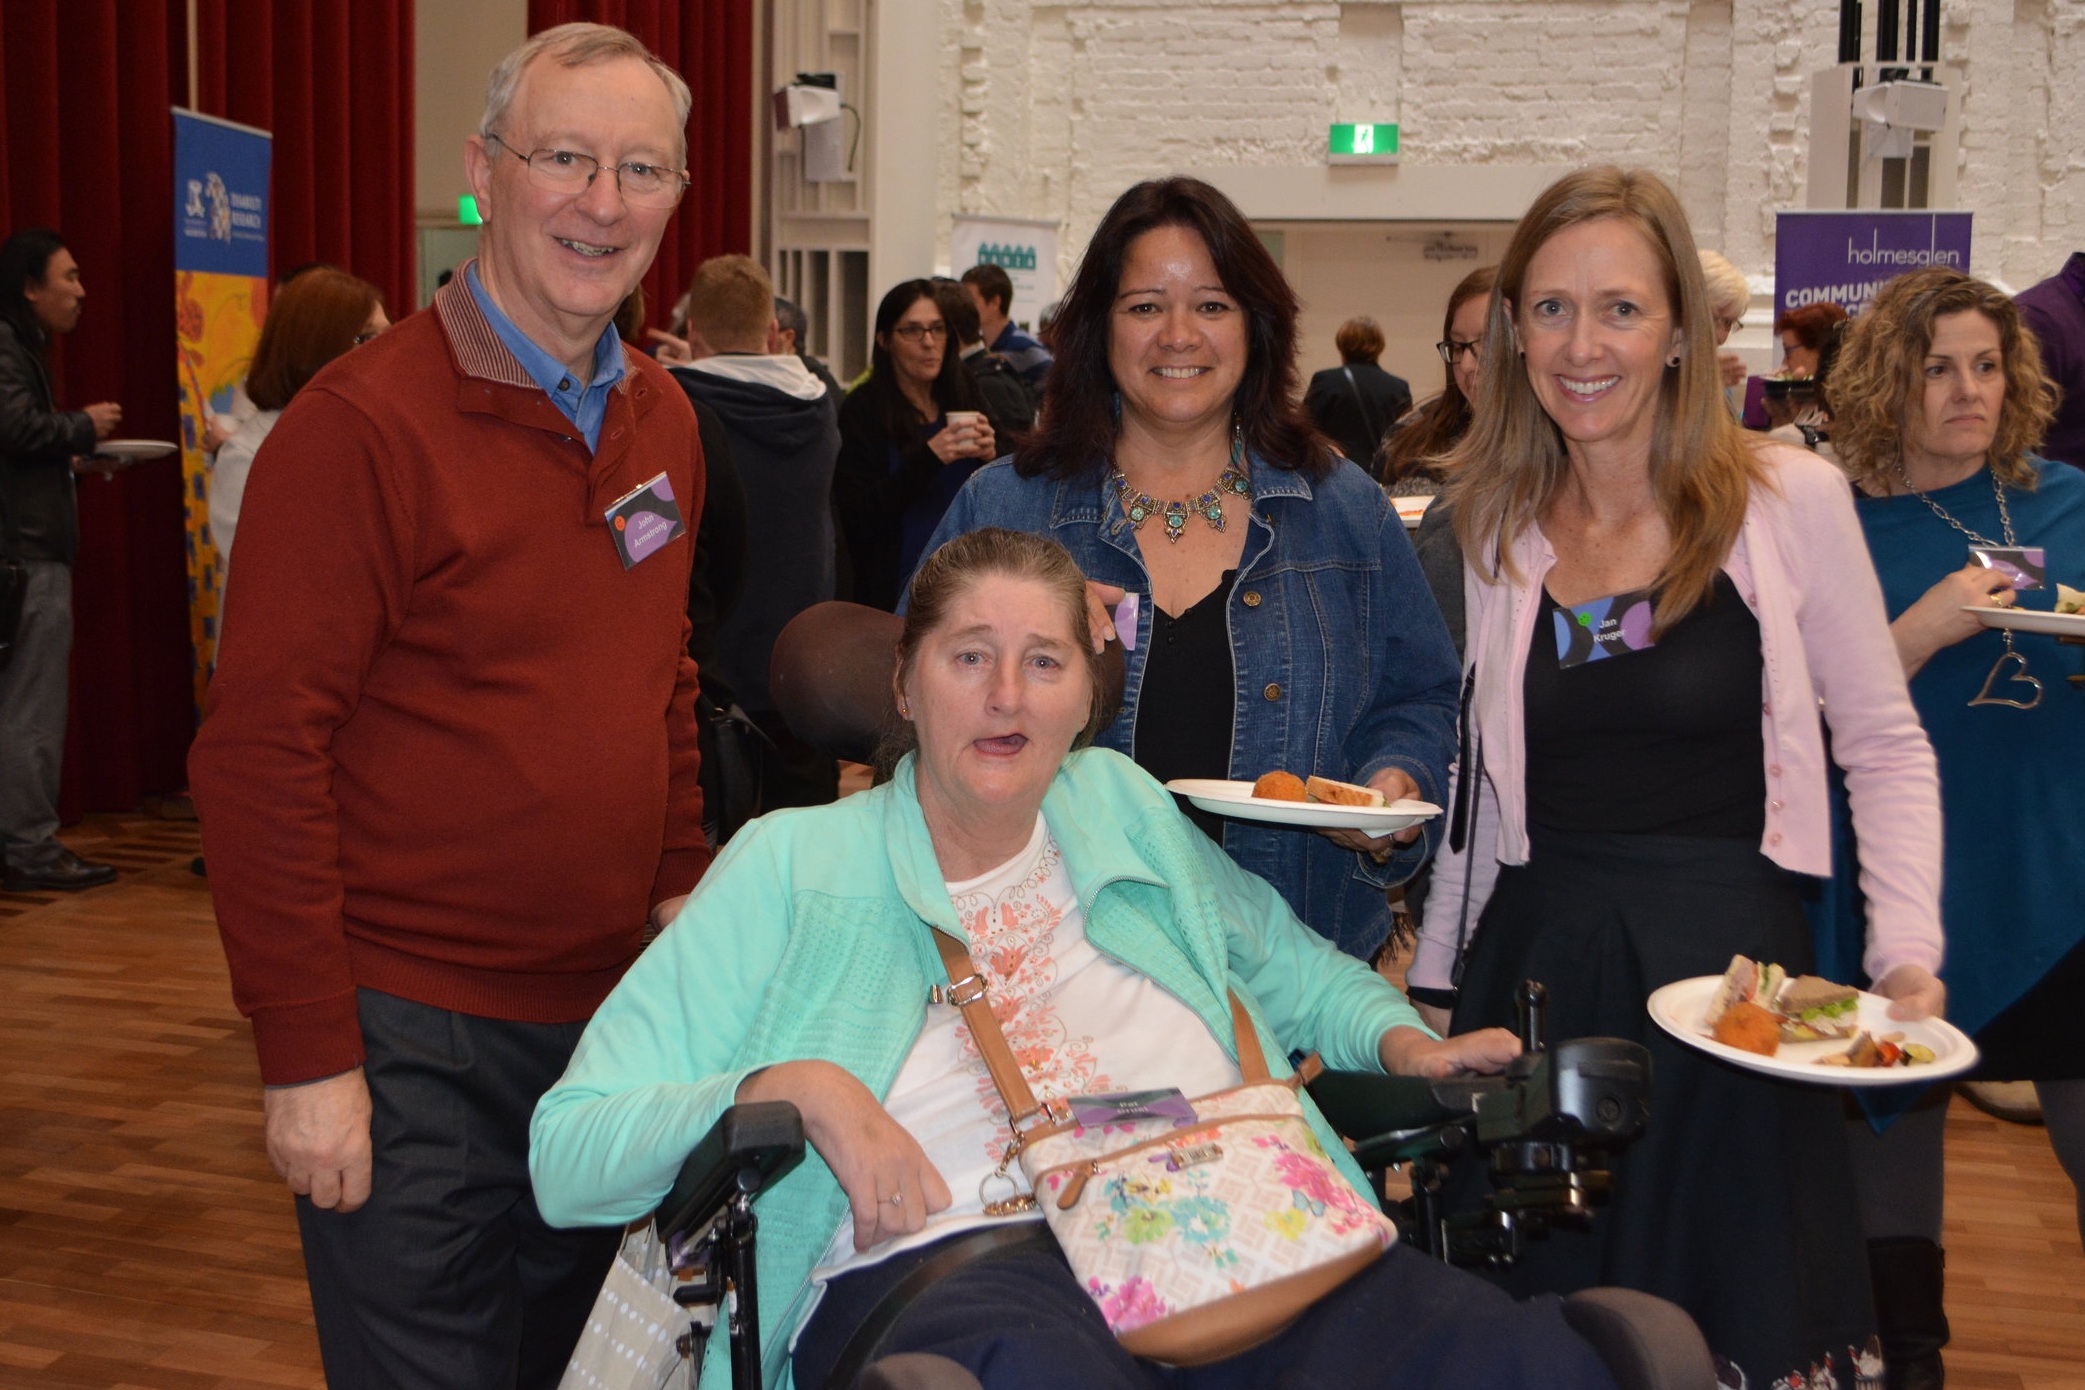  Four attendees at a conference standing with their lunch in hand smiling at the camera.  There’s a man and three women.  One of the women is in a wheelchair. 